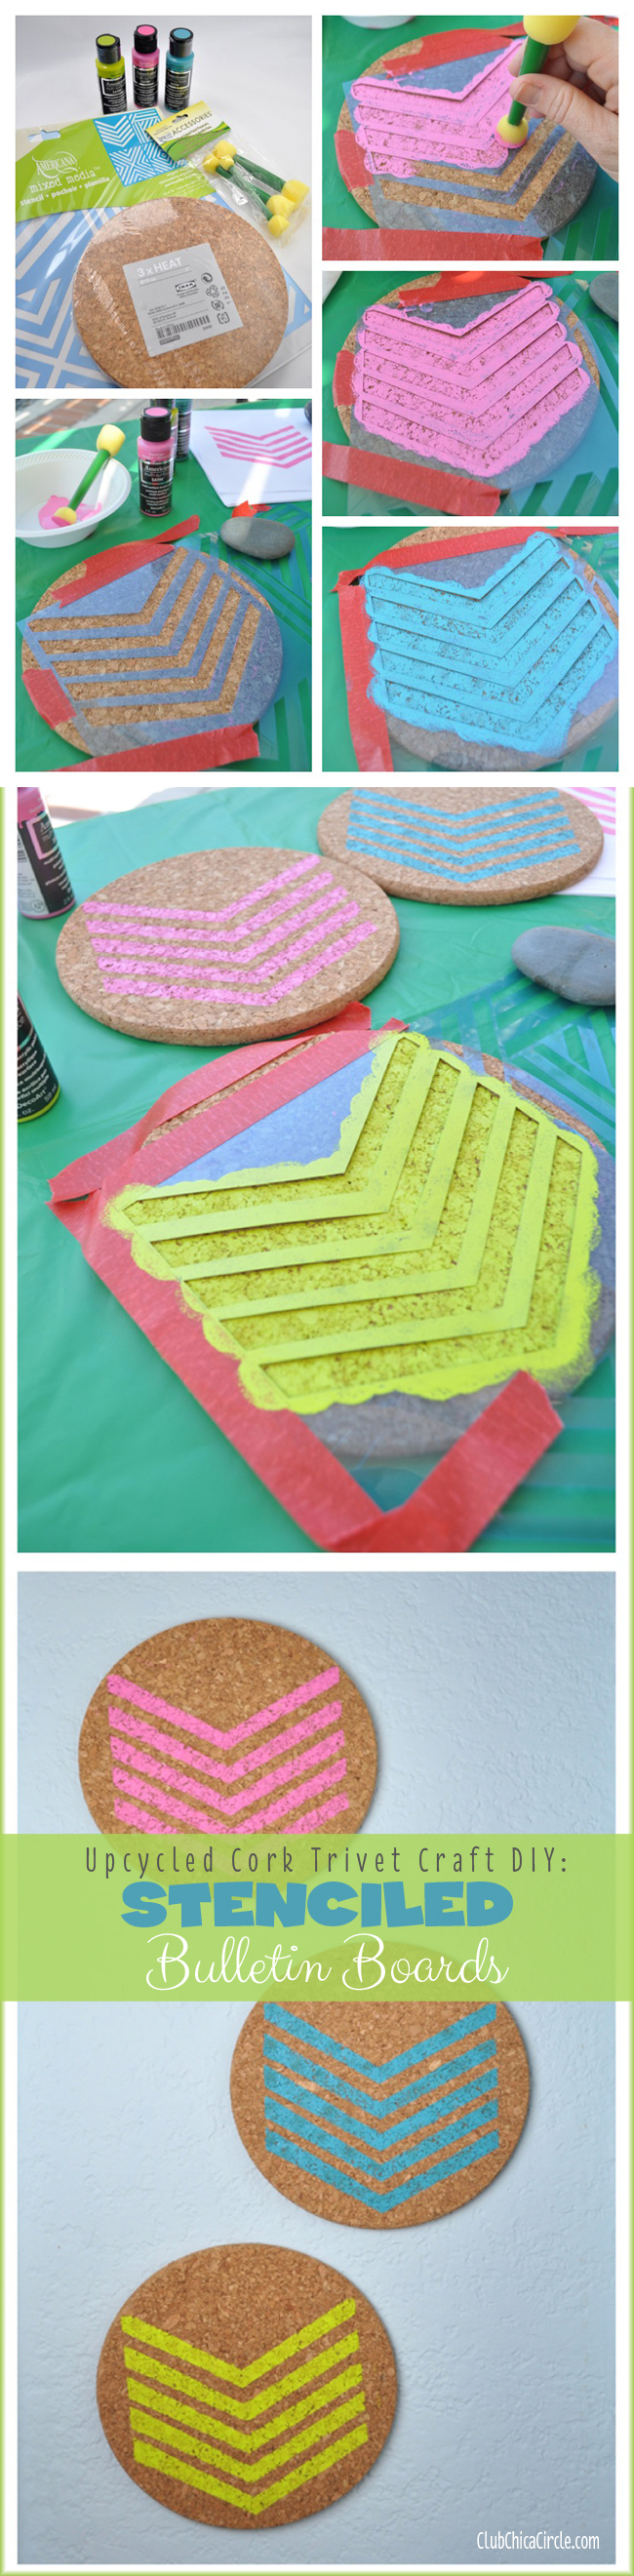 Upcycle Craft DIY- Cork Trivets into Stenciled Bulletin Boards @clubchicacircle